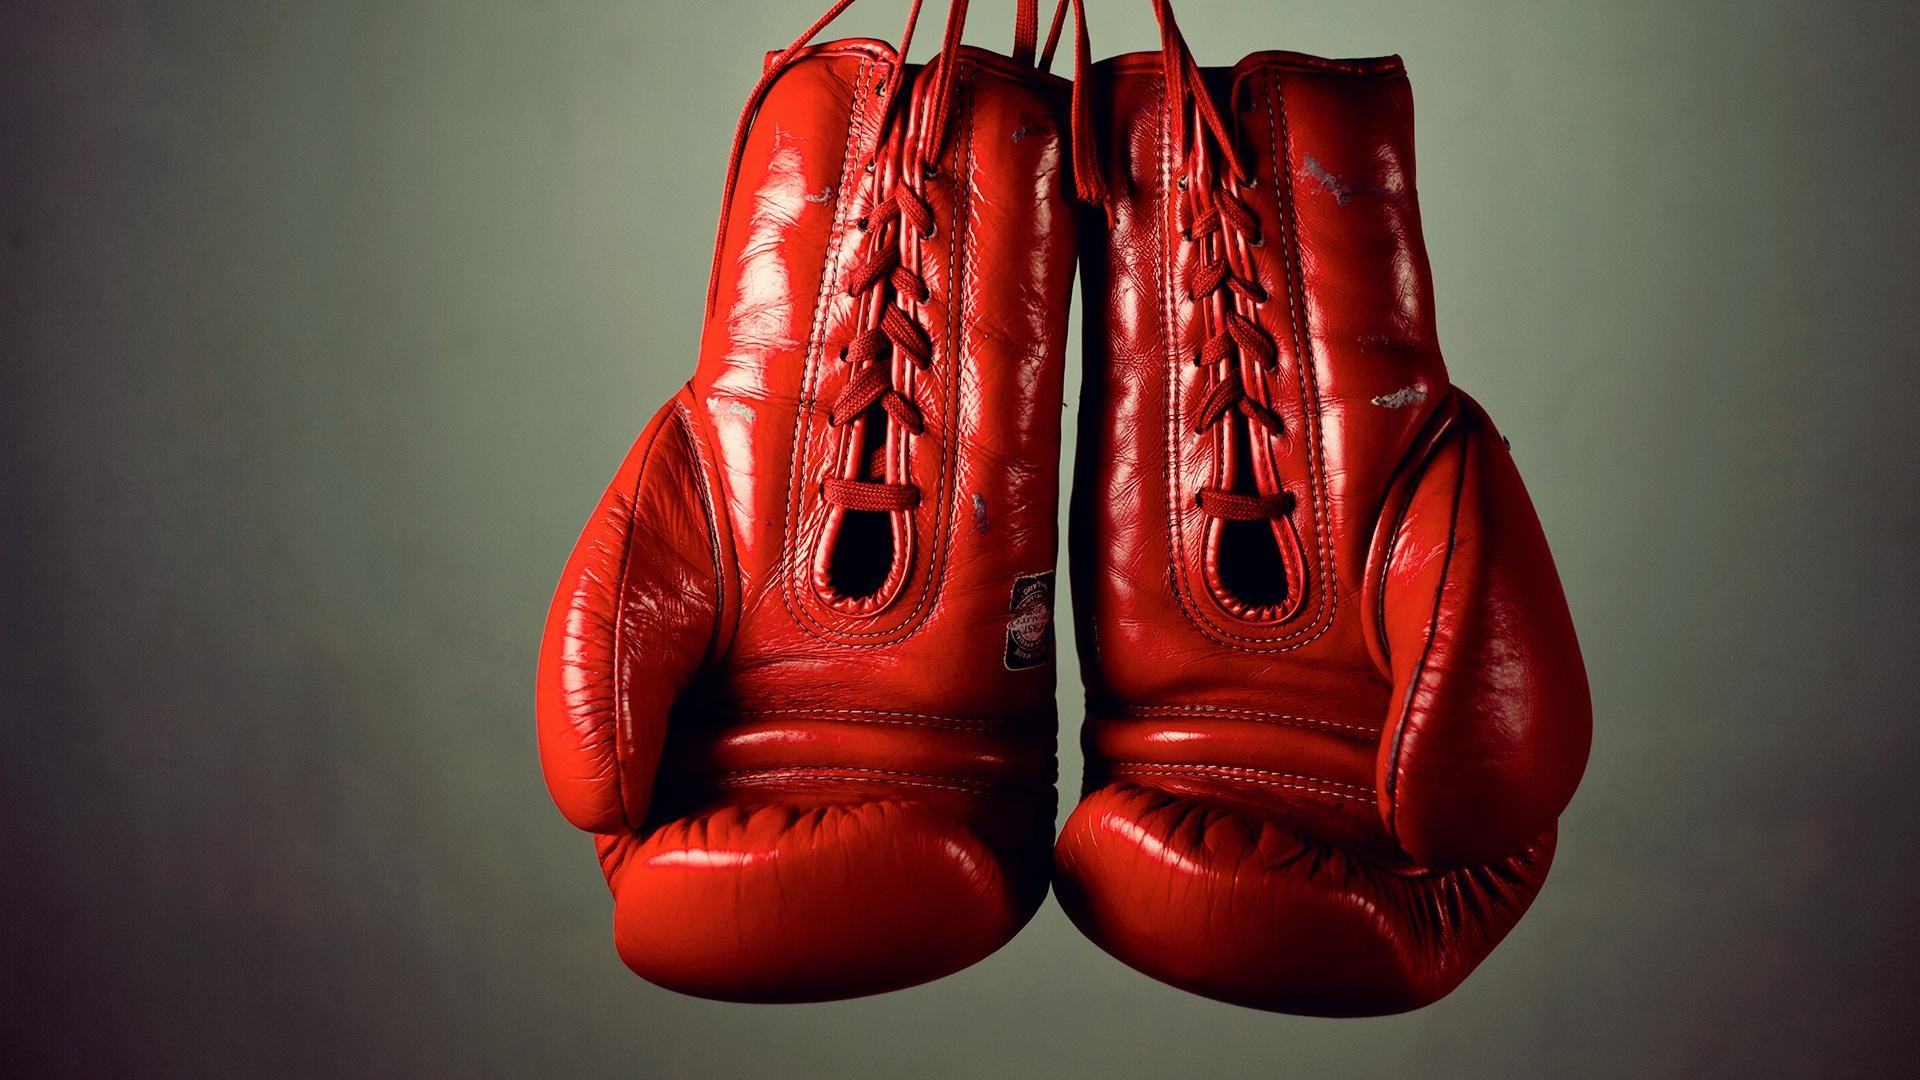 1920x1080 wallpaper.wiki-Red-Boxing-Gloves-Background-PIC-WPB008619